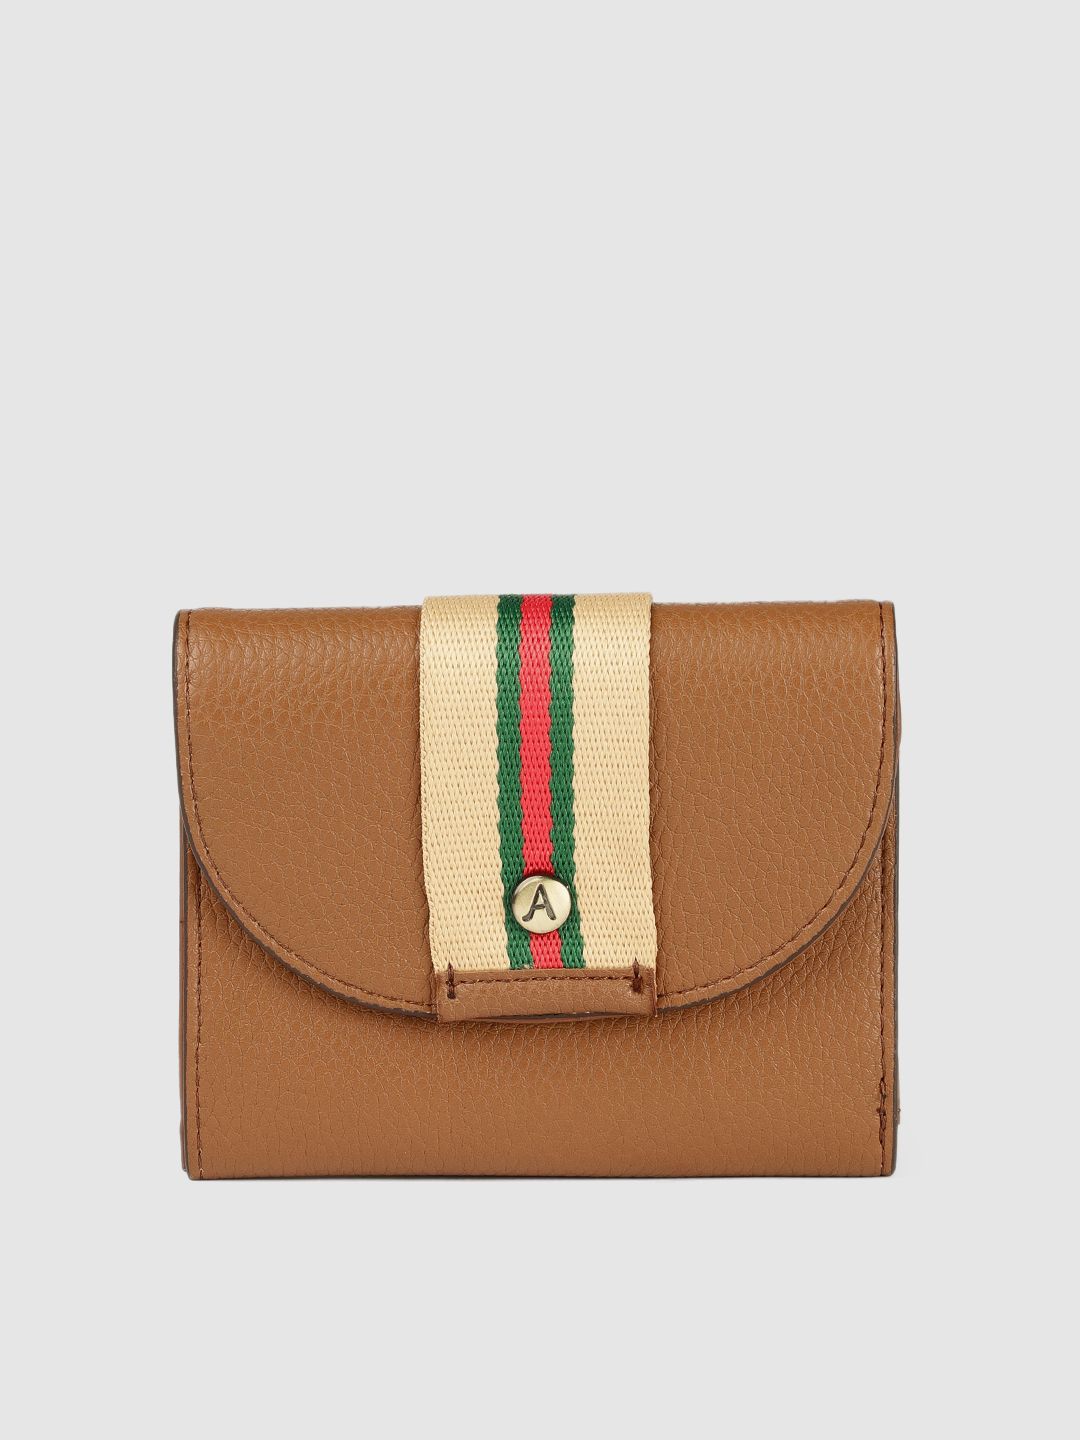 Accessorize Women Tan Three Fold Wallet With Striped Detail Price in India